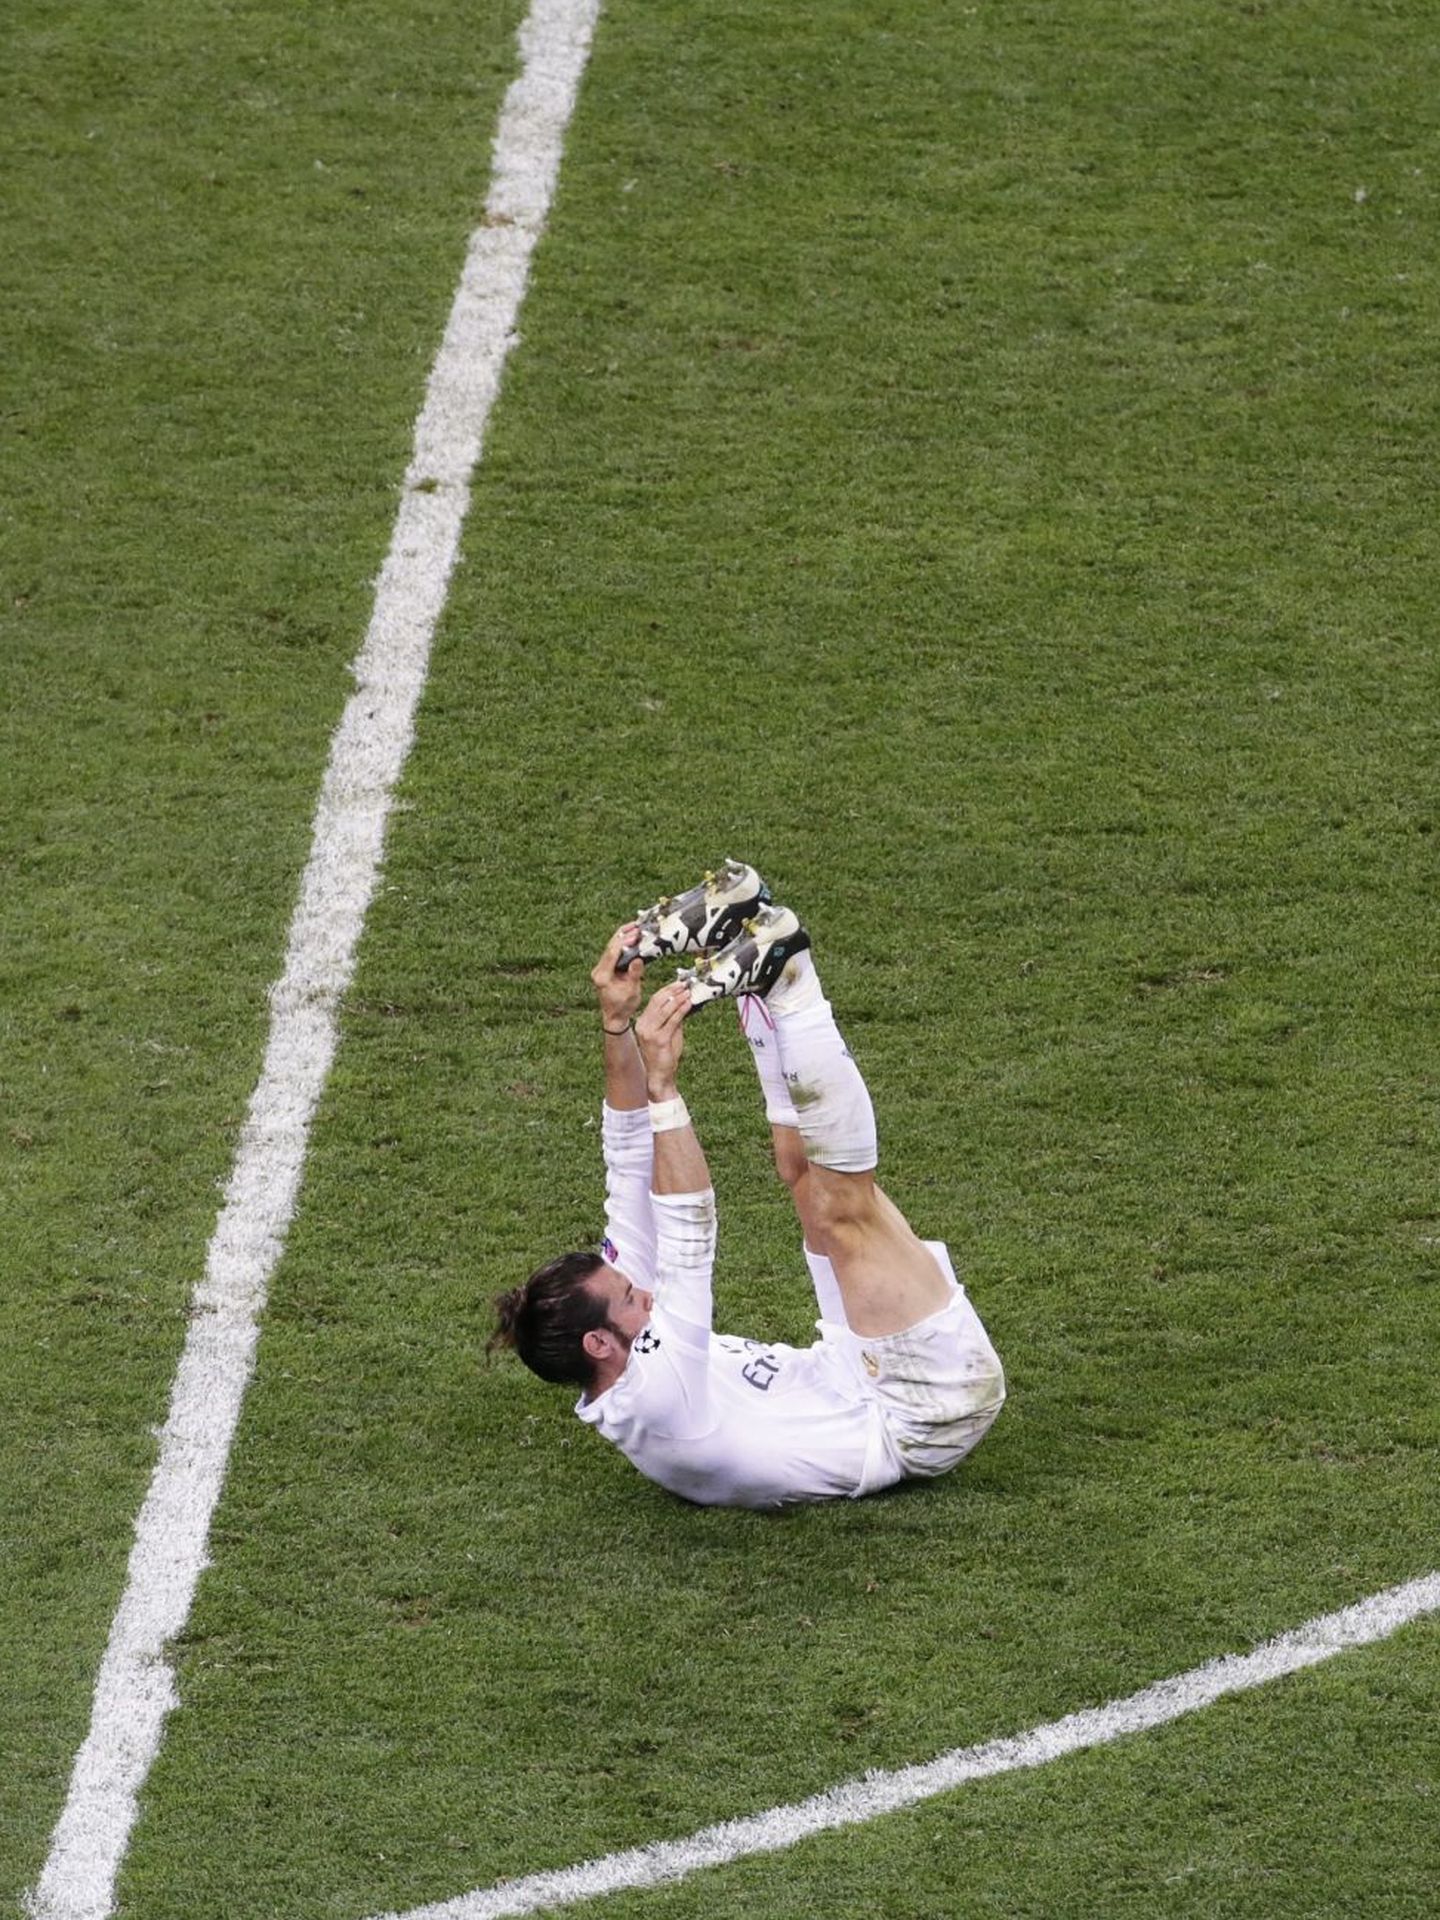 . Milan (Italy), 28 05 2016.- Real Madrid's Gareth Bale stretches during the UEFA Champions League final between Real Madrid and Atletico Madrid at the Giuseppe Meazza Stadium in Milan, Italy, 28 May 2016. (Liga de Campeones, Italia) EFE EPA ARMANDO BABANI